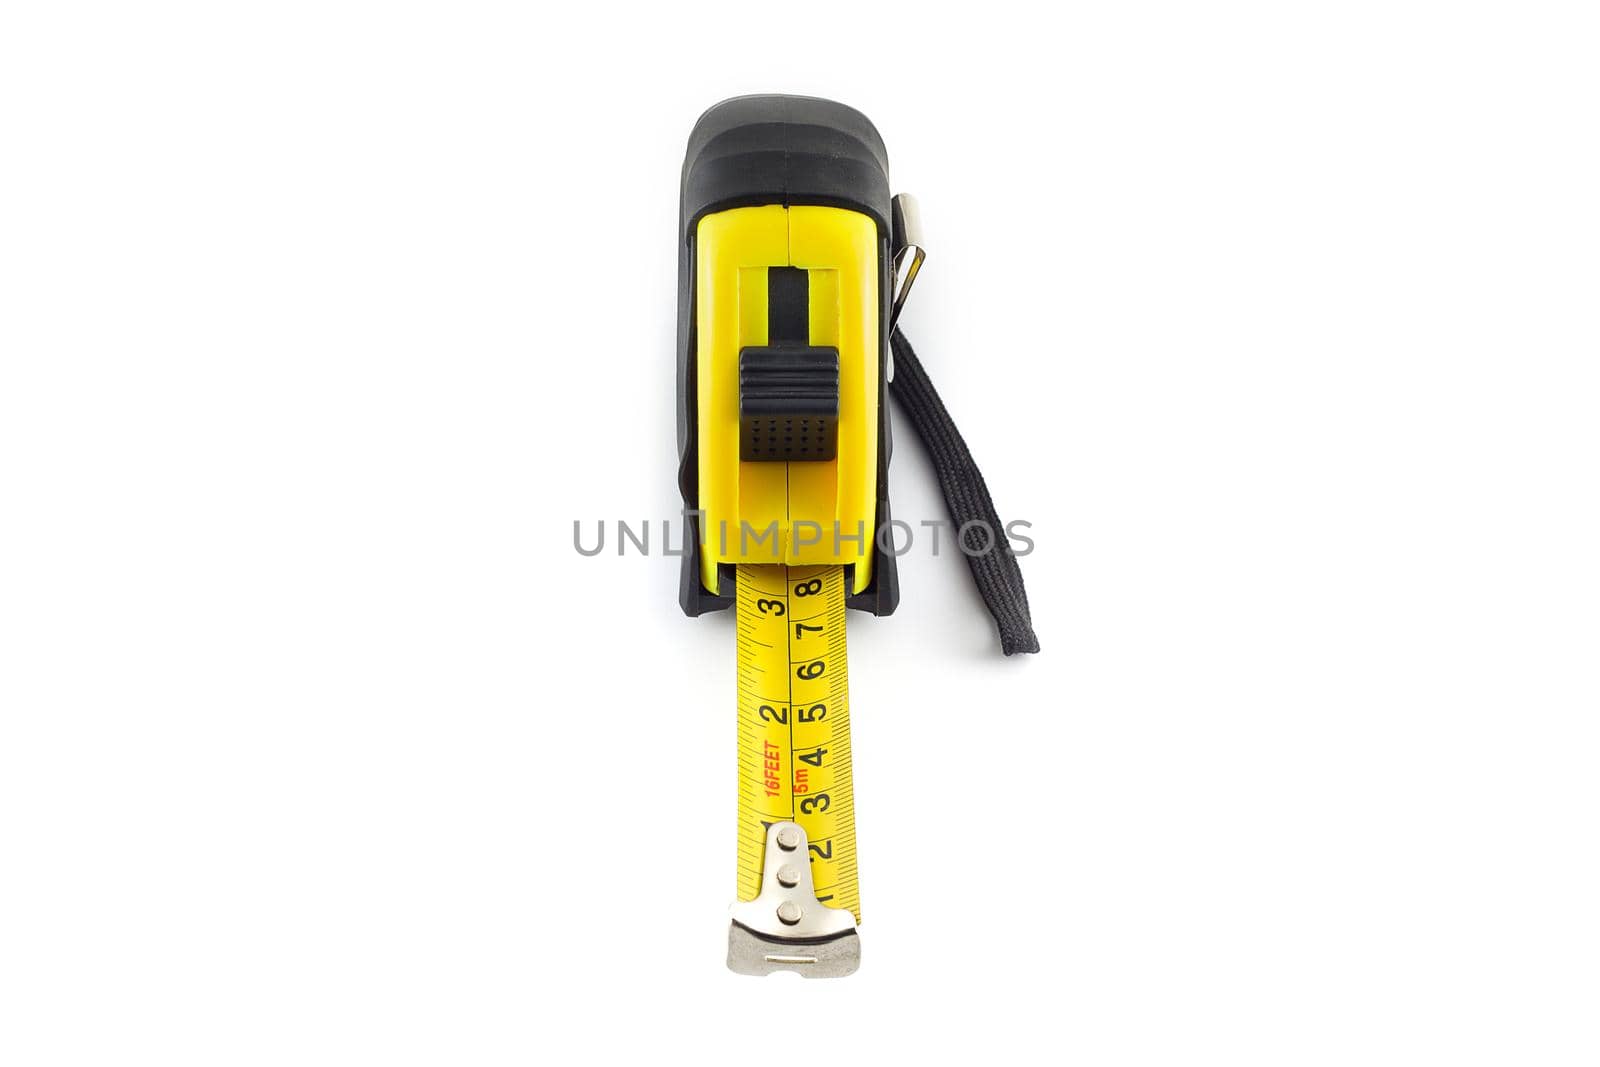 Yellow tape measure or steel tape isolated white background.